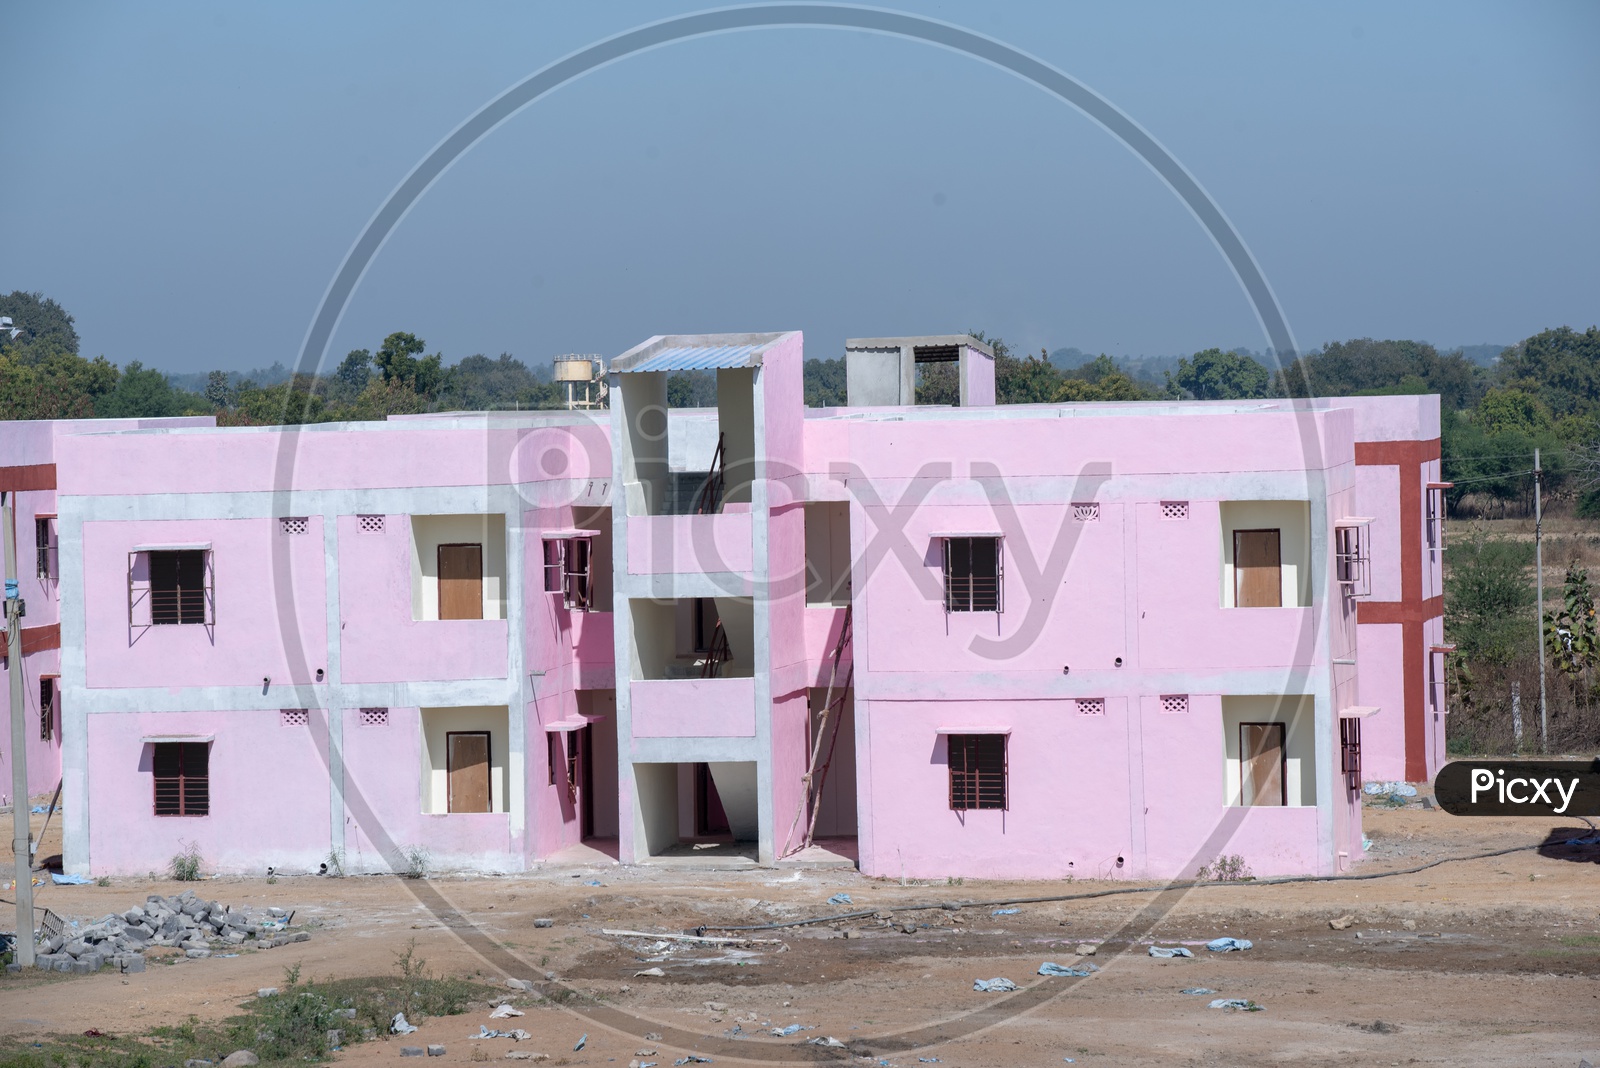 2BHK Houses Built by Telangana Government under 2BHK Housing Scheme in Kamareddy